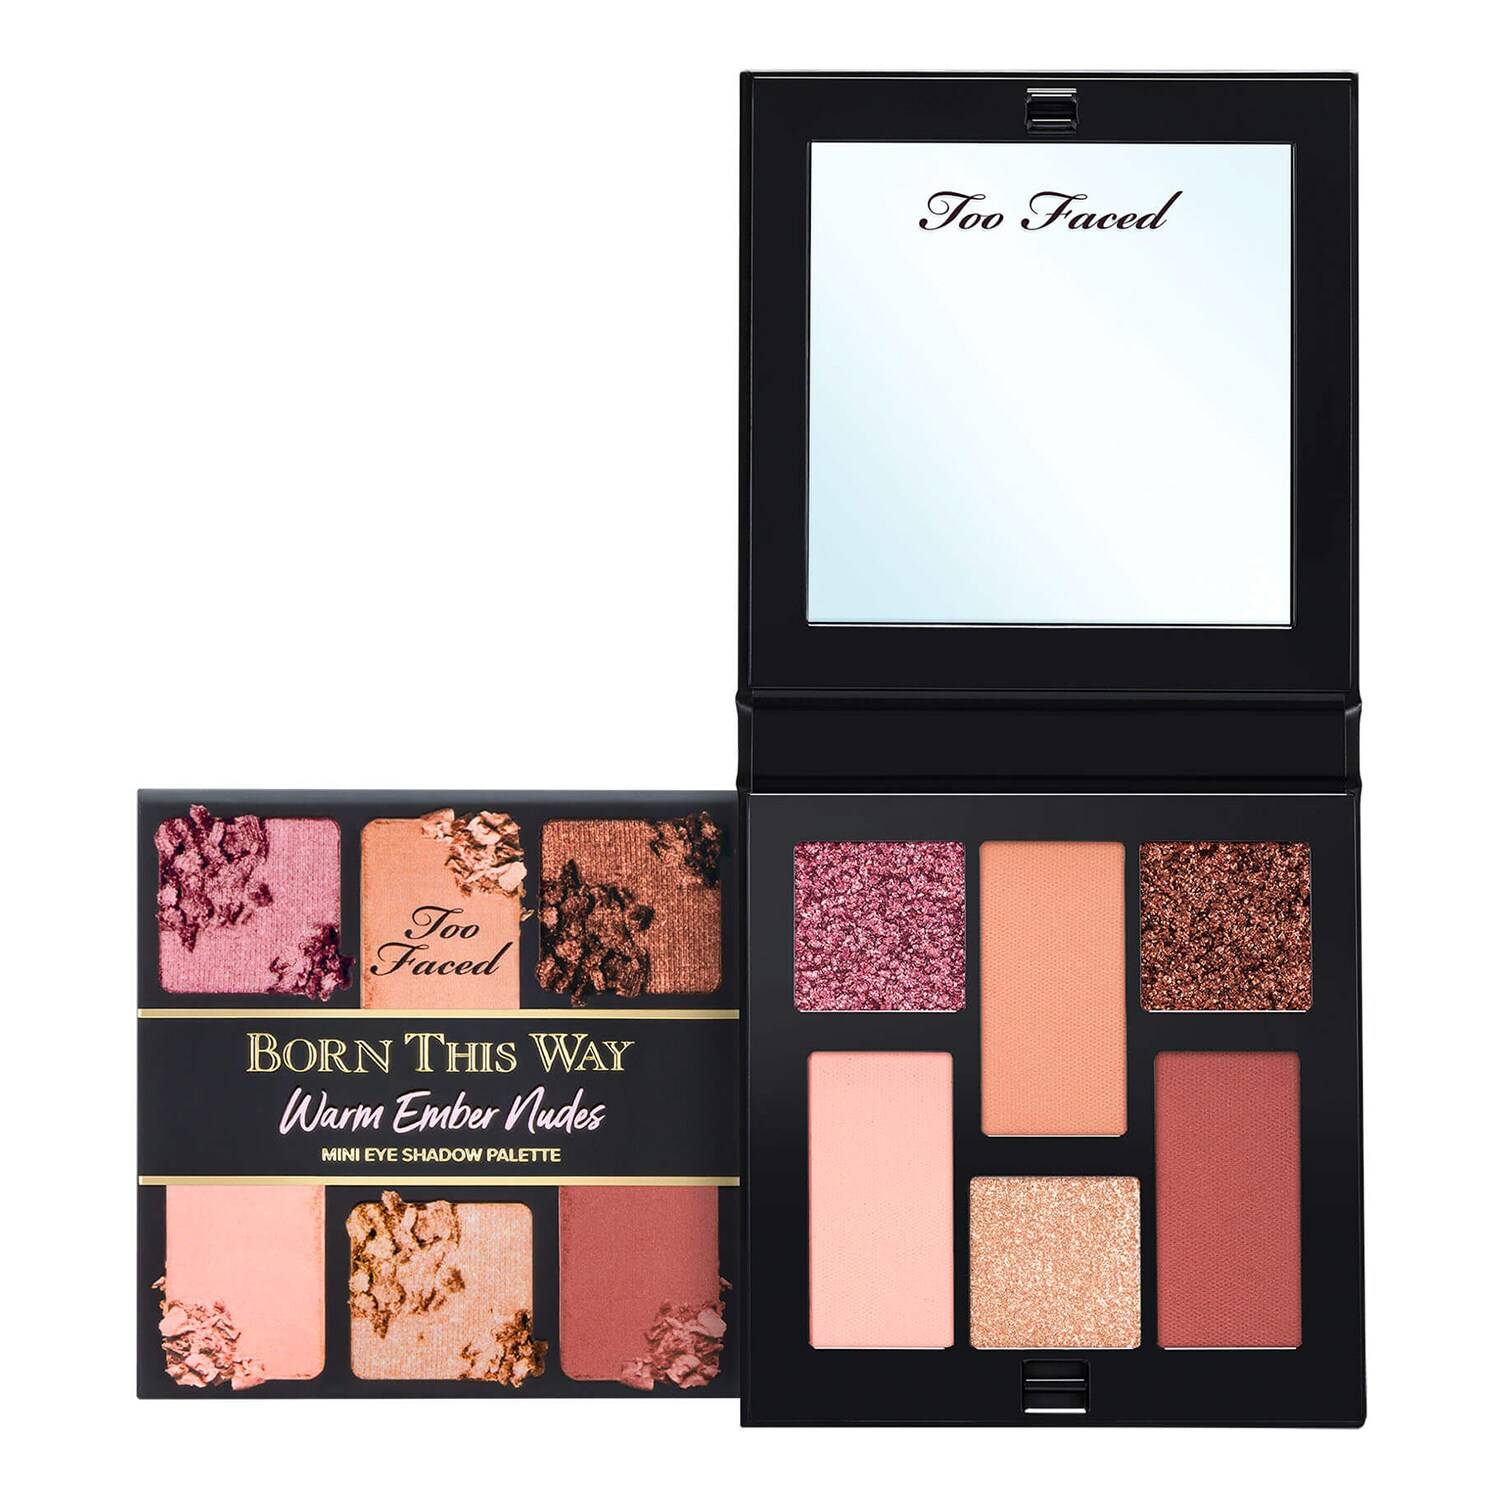 Too Faced Born This Way Warm Ember Nudes Mini Eyeshadow Palette 5.7G